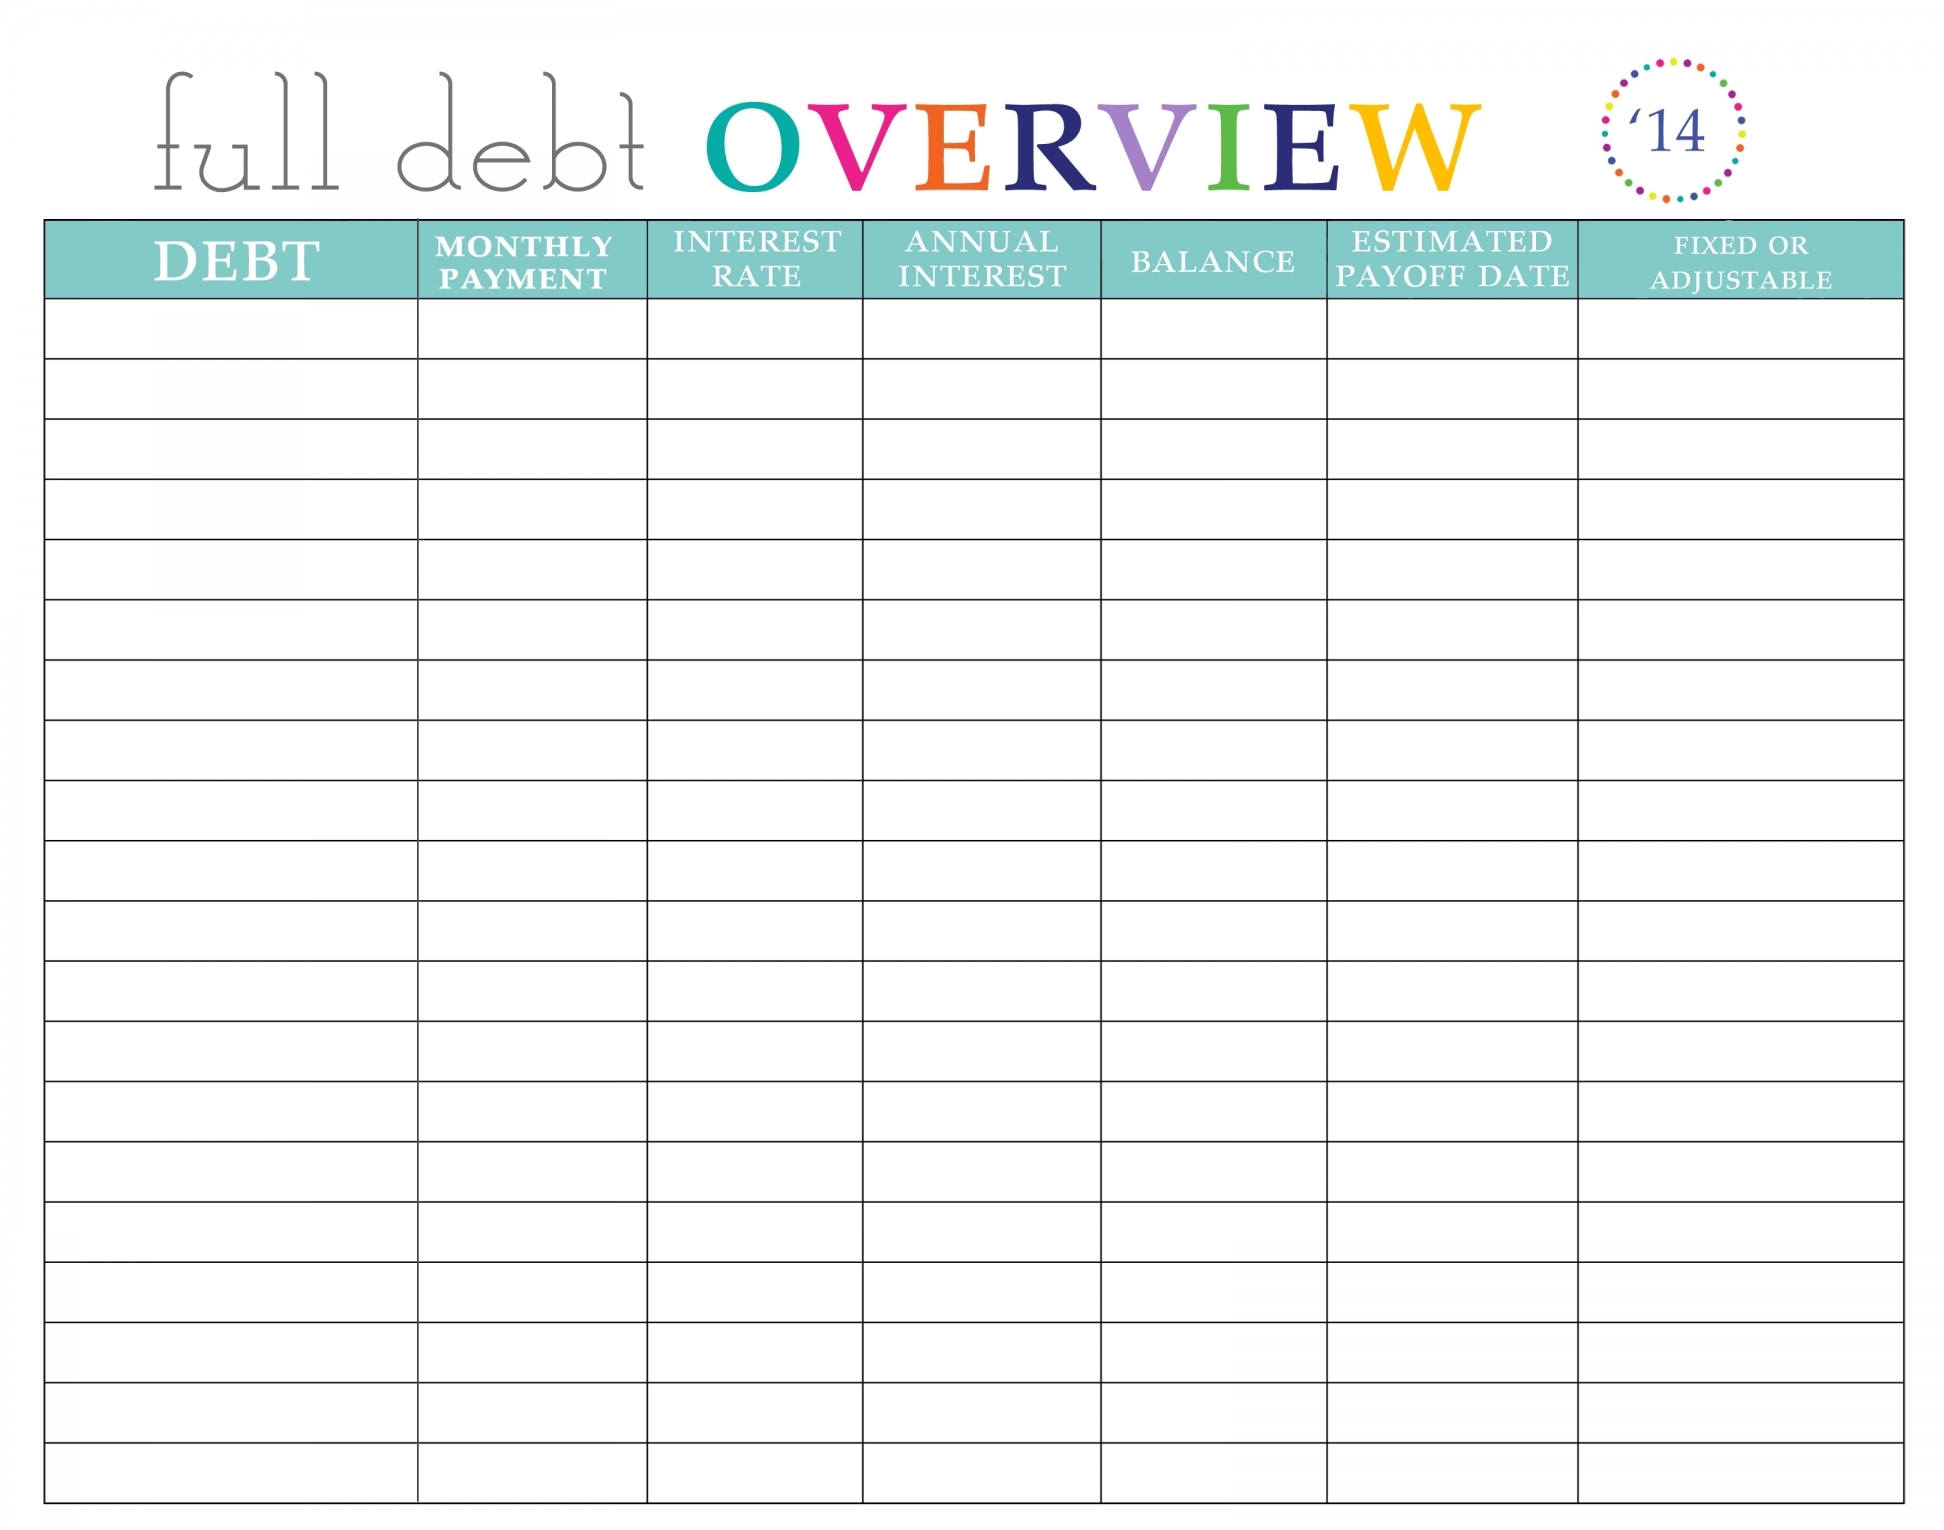 Bill Pay Tracker Spreadsheet - Yeniscale.co  Bills Paid In And Out Sheet